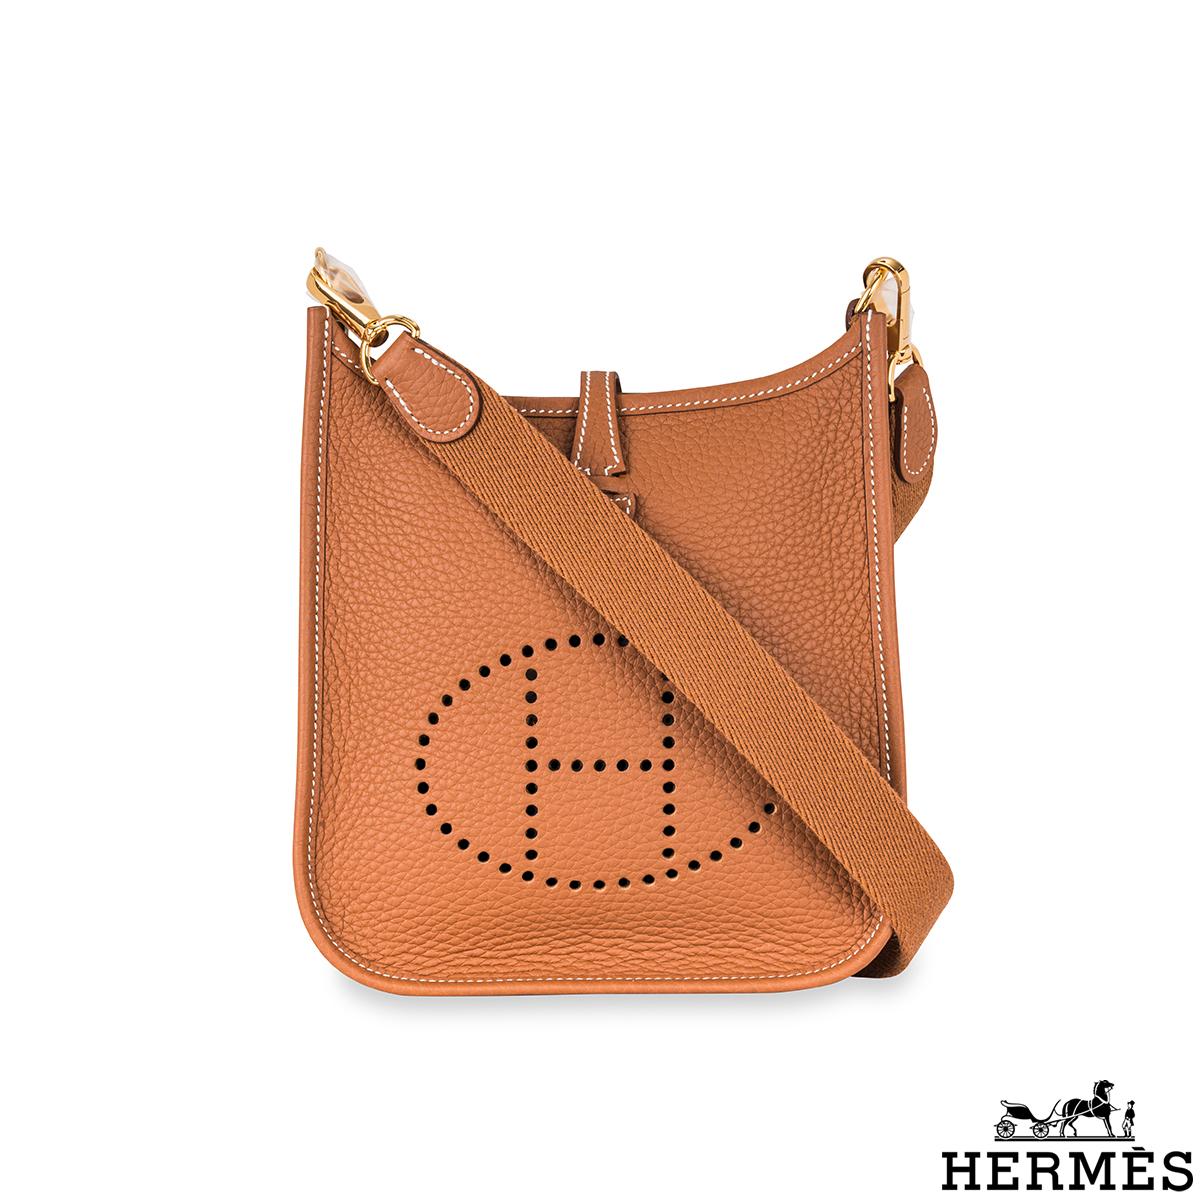 A lovely Hermès mini Evelyne handbag. The exterior of this Evelyne bag is crafted from gold Taurillon Clemence leather complemented with gold-tone hardware and white stitching. It features a perforated 